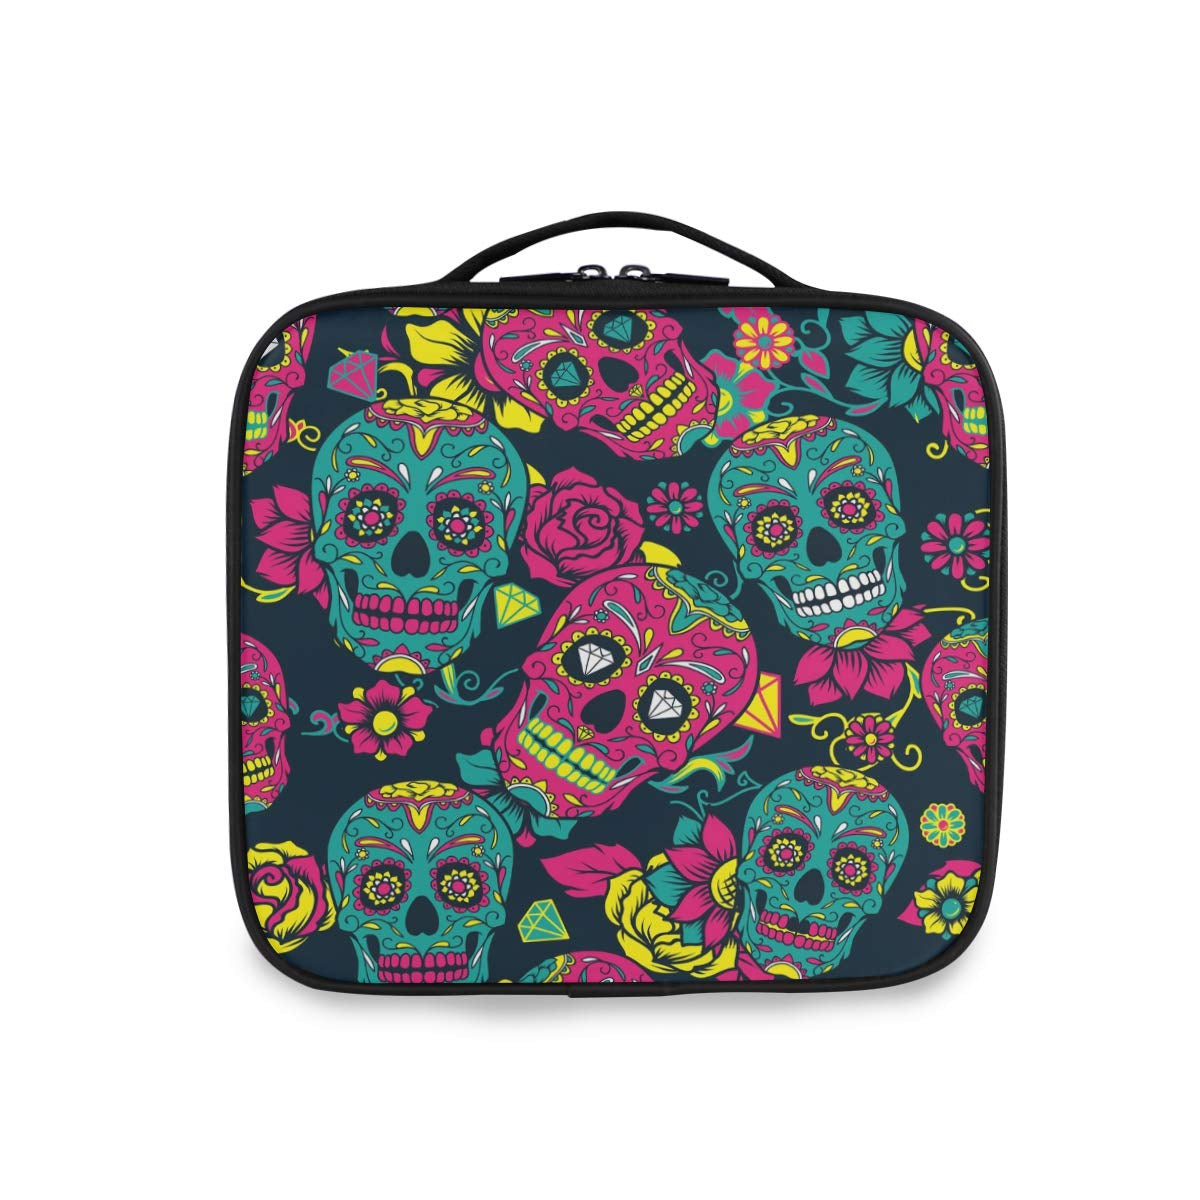 ALAZA Day of the Dead Colorful Sugar Skull with Floral Travel Makeup Train Case Jewelry Travel Organizer for Boys Girls